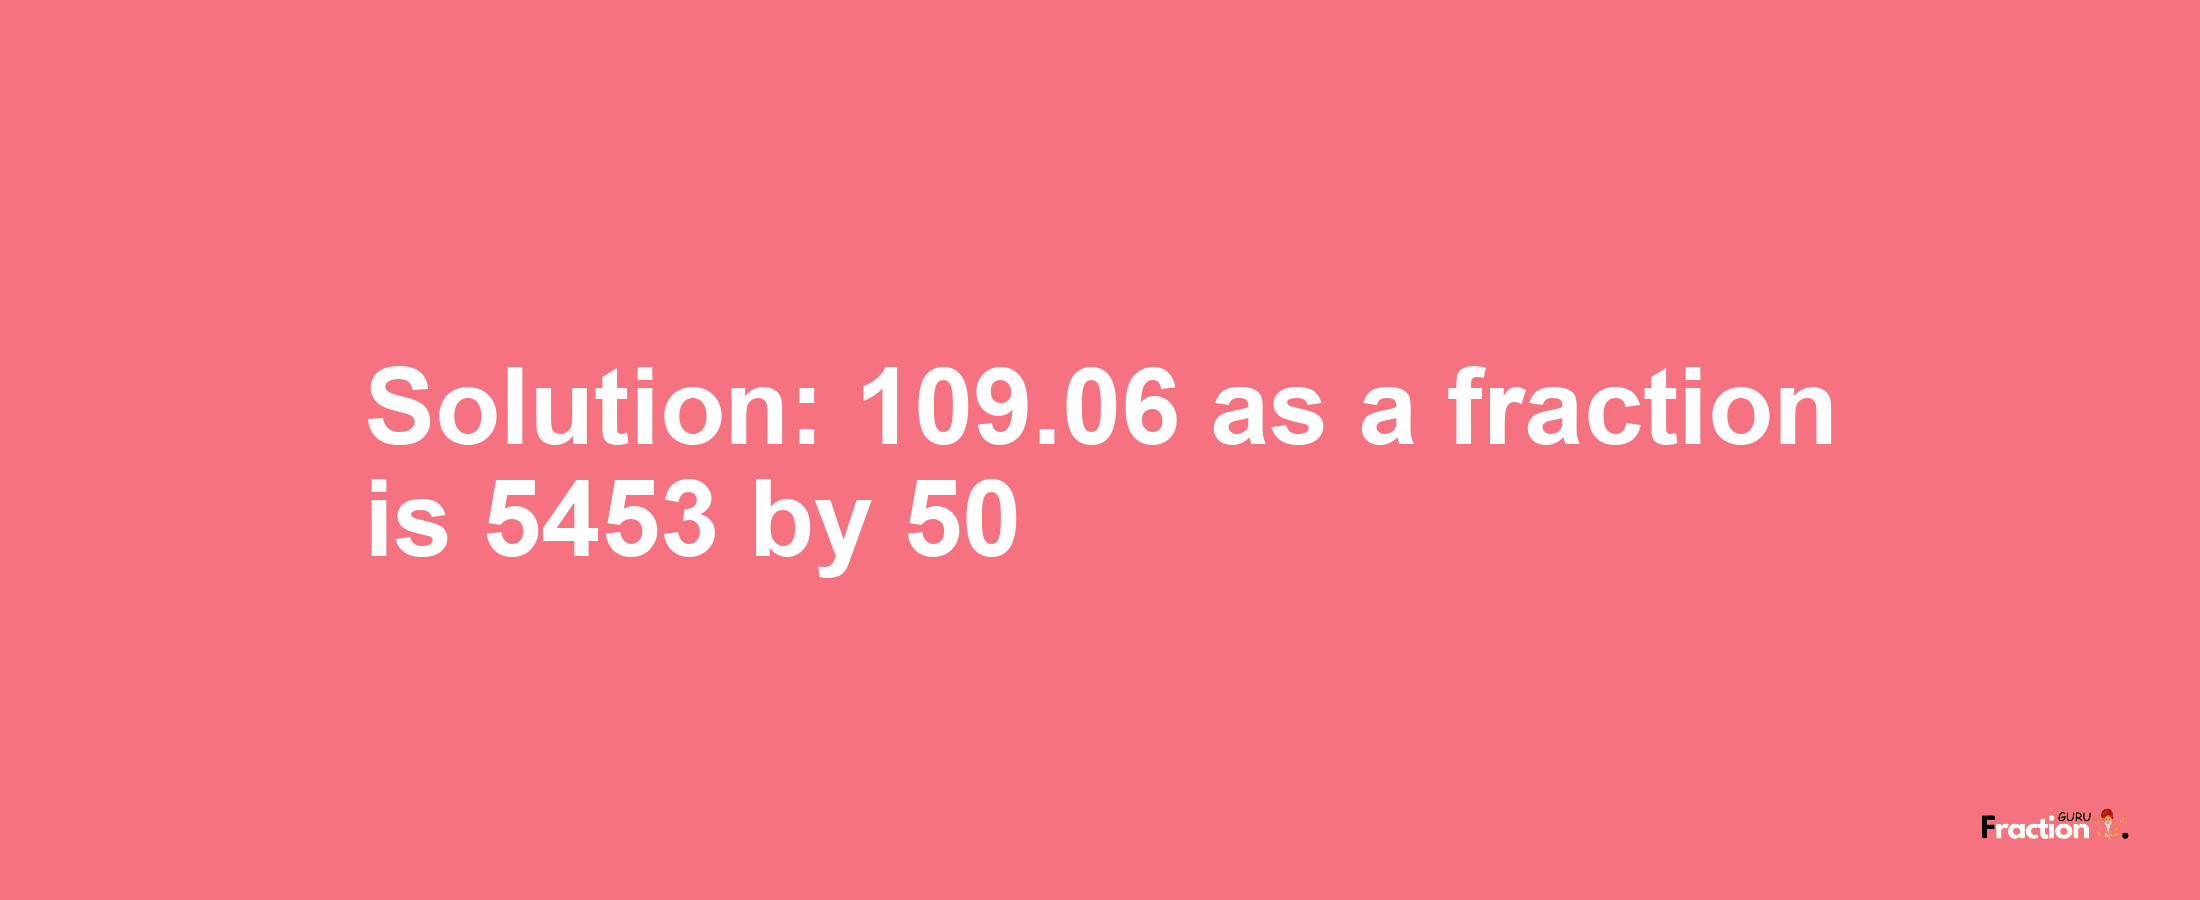 Solution:109.06 as a fraction is 5453/50